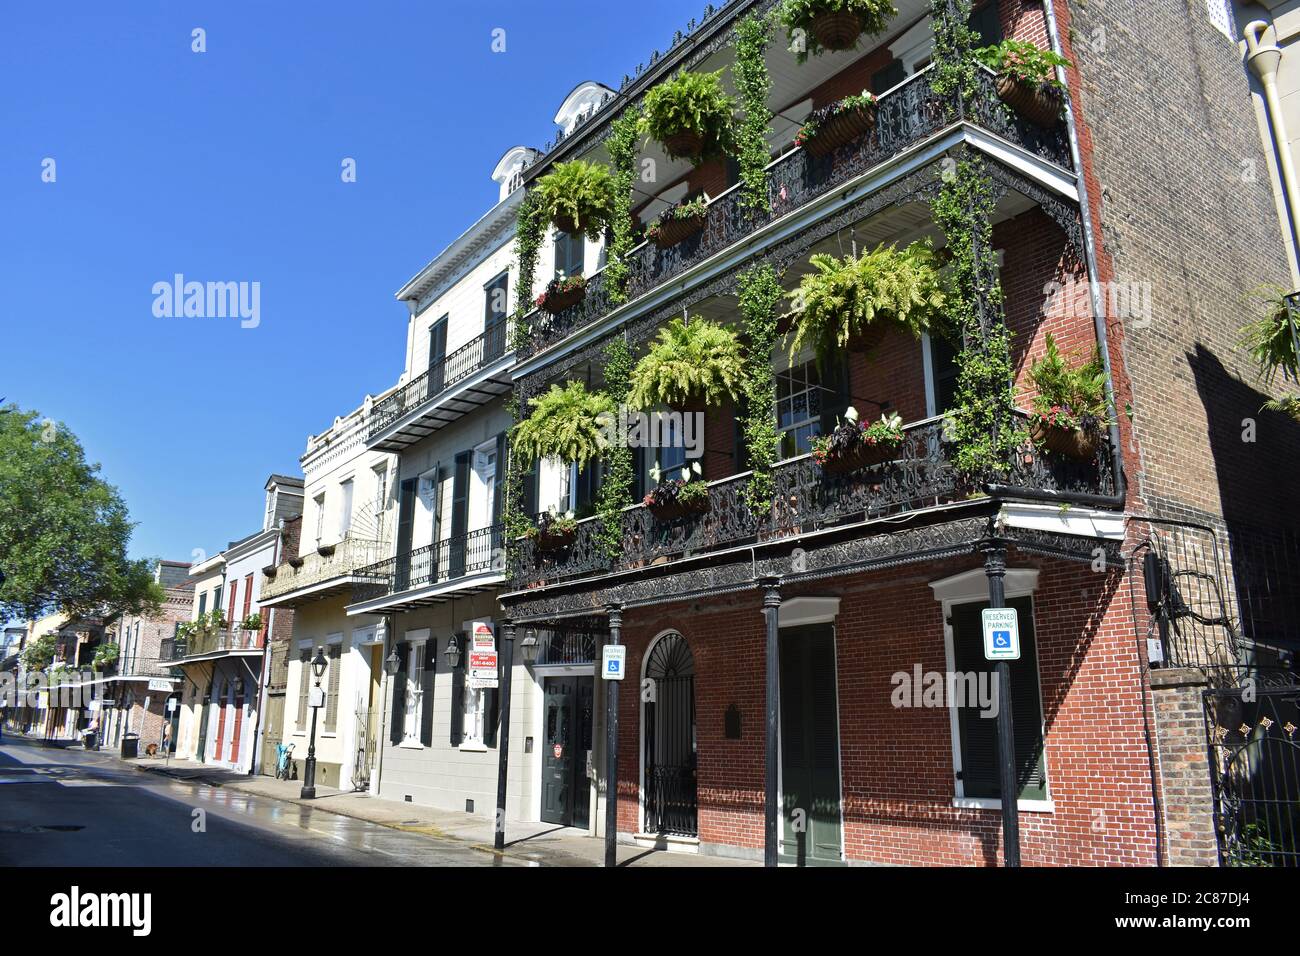 Elaborate ironwork galleries covered in lush green plants on a building along Royal street in the historic French Quarter of New Orleans, Louisiana. Stock Photo